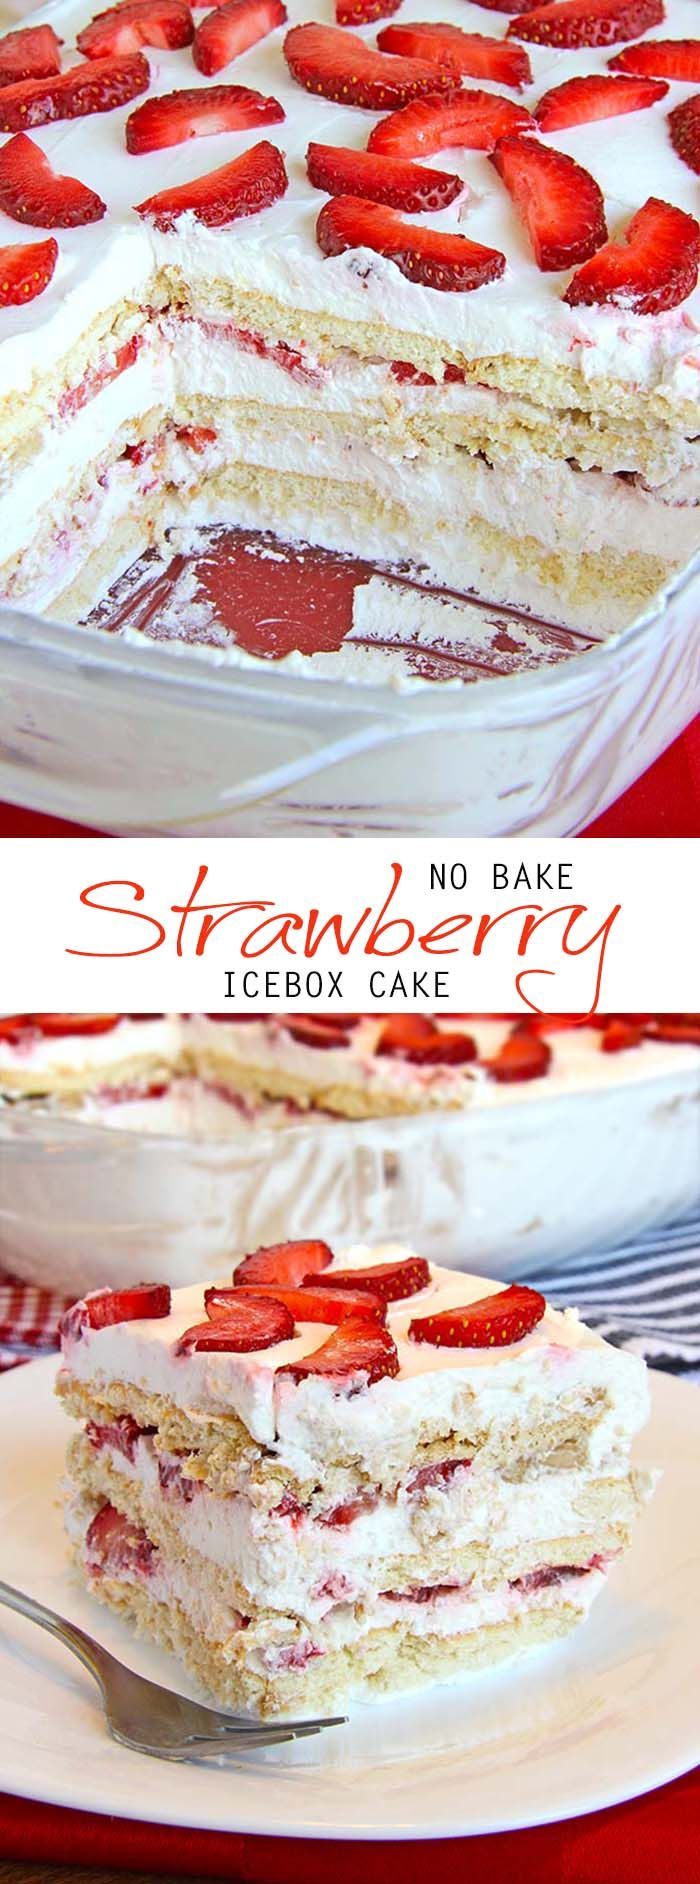 Looking for a quick and easy Spring/Summer dessert recipe? Try out delicious No Bake Strawberry Icebox